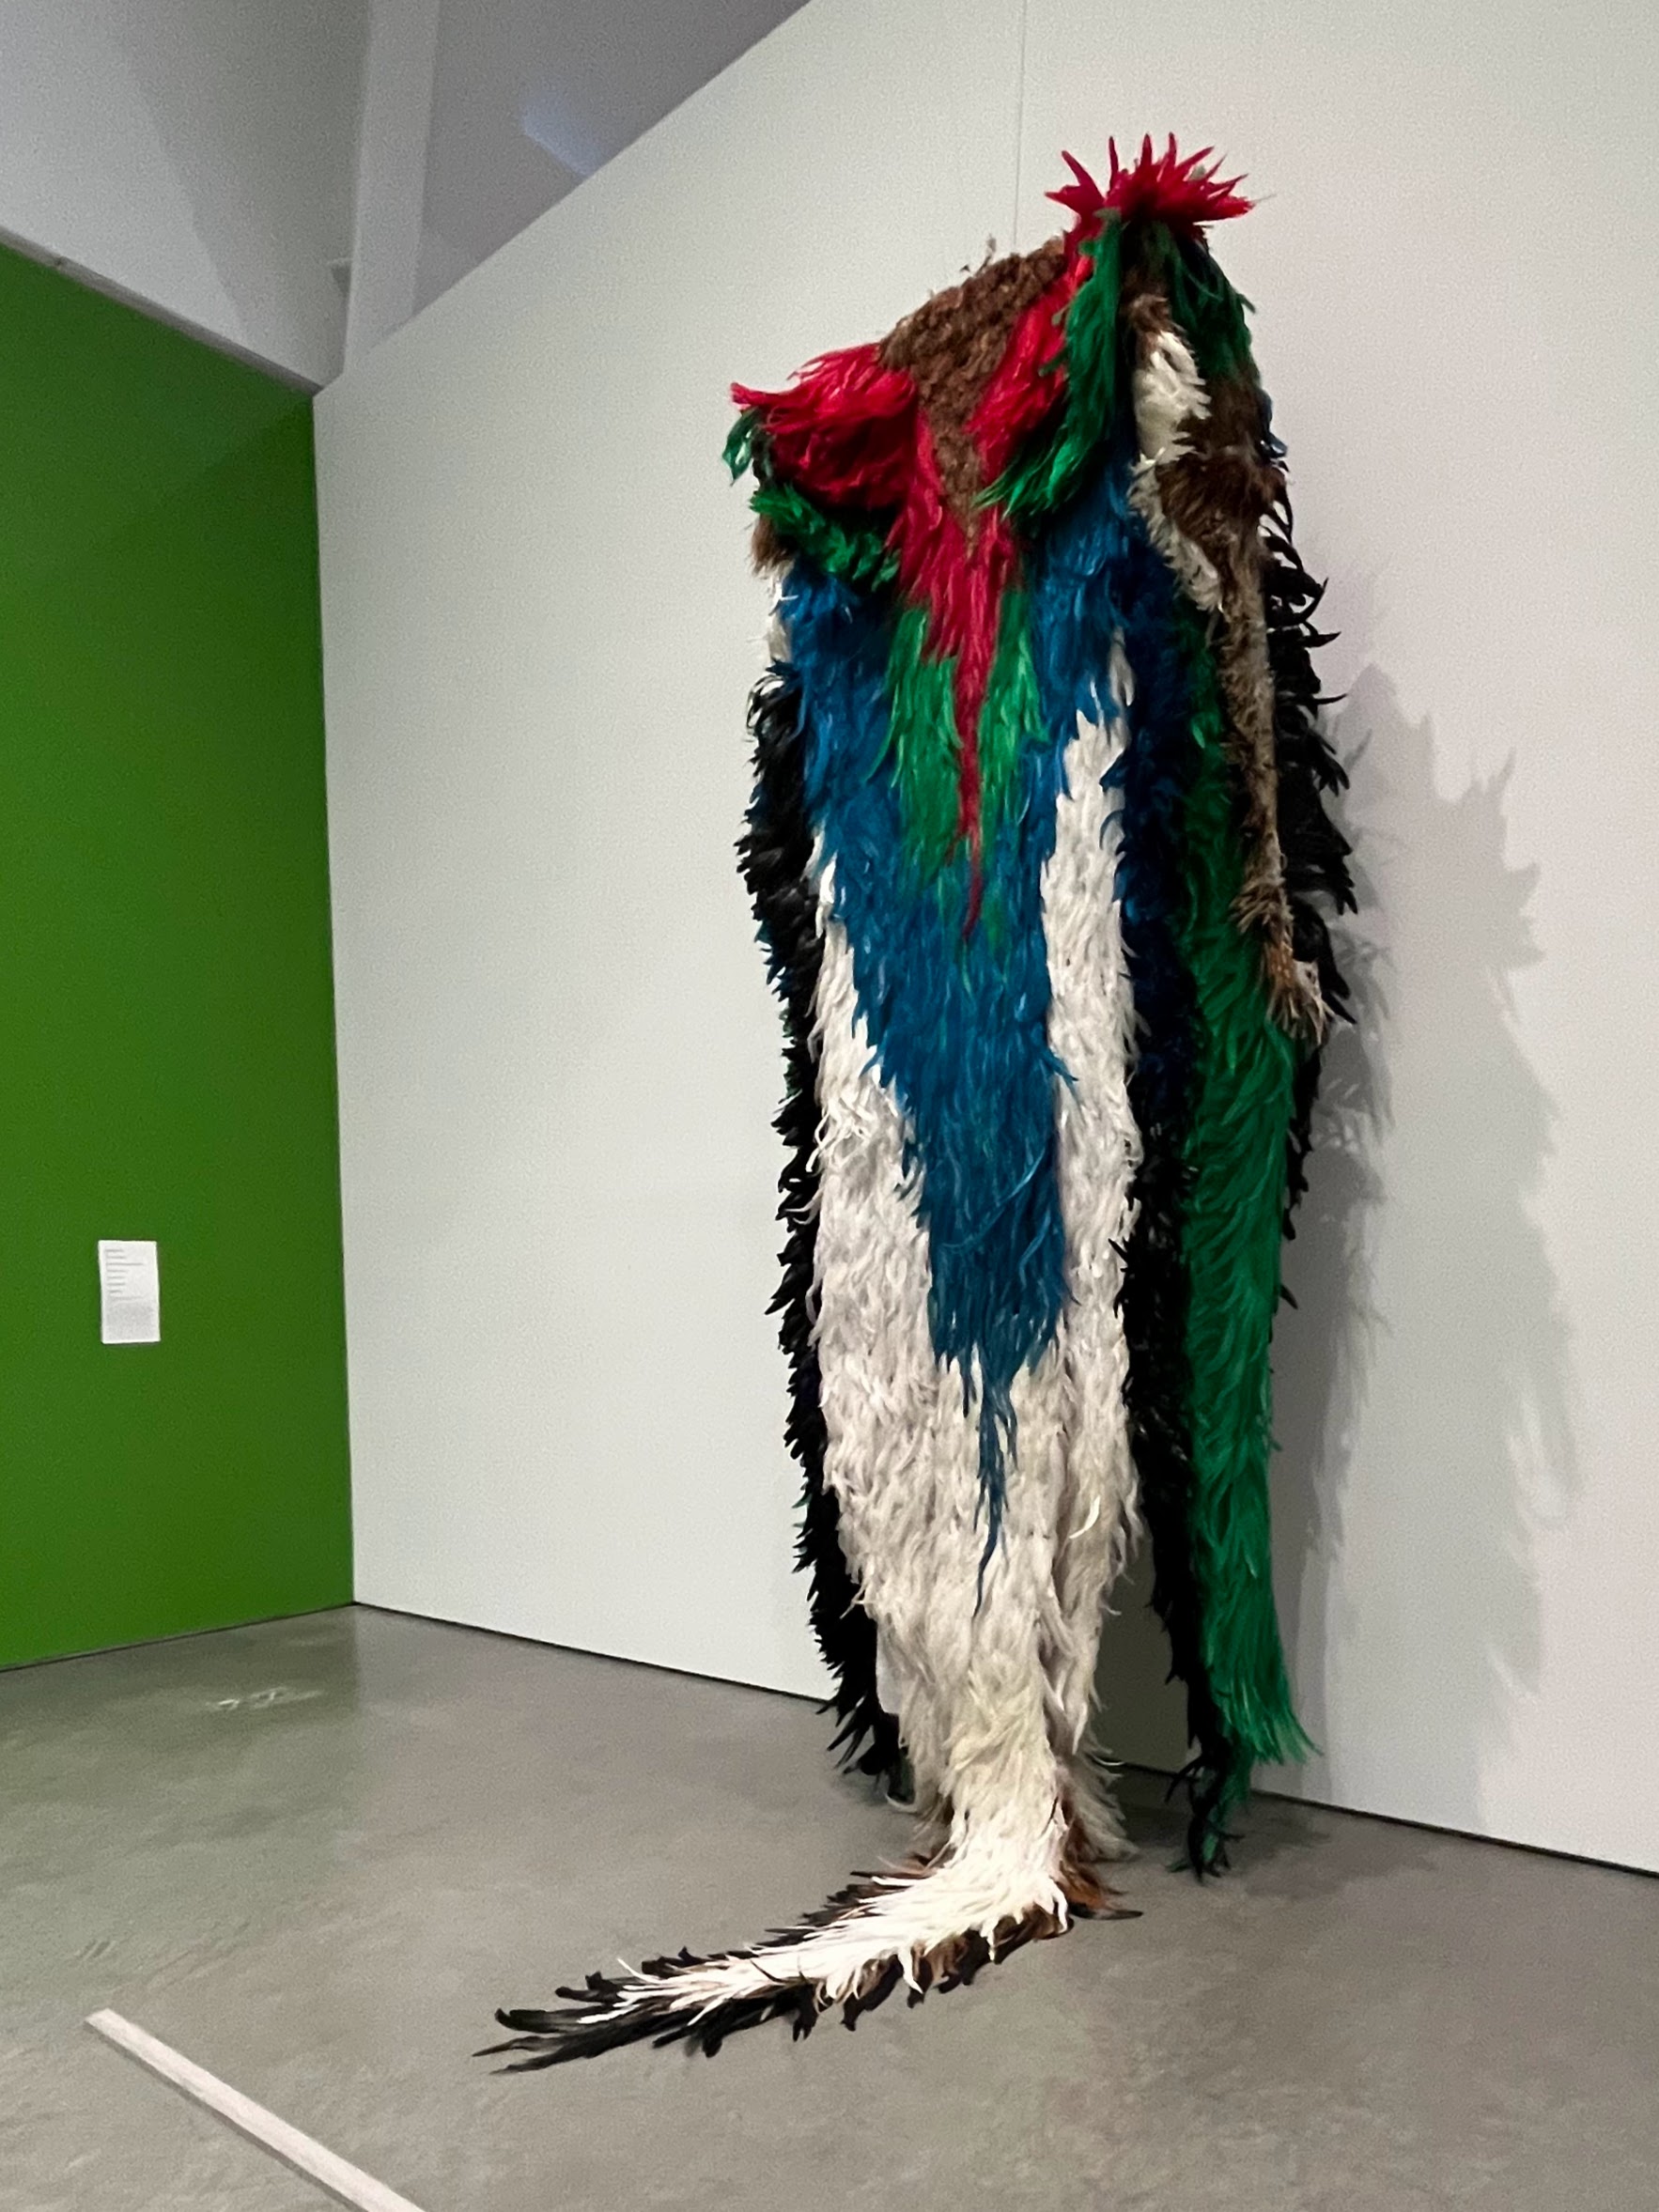 Larger-than-life-size cloak made of white, black, blue, green, and red feathers, installed in the corner of a museum gallery